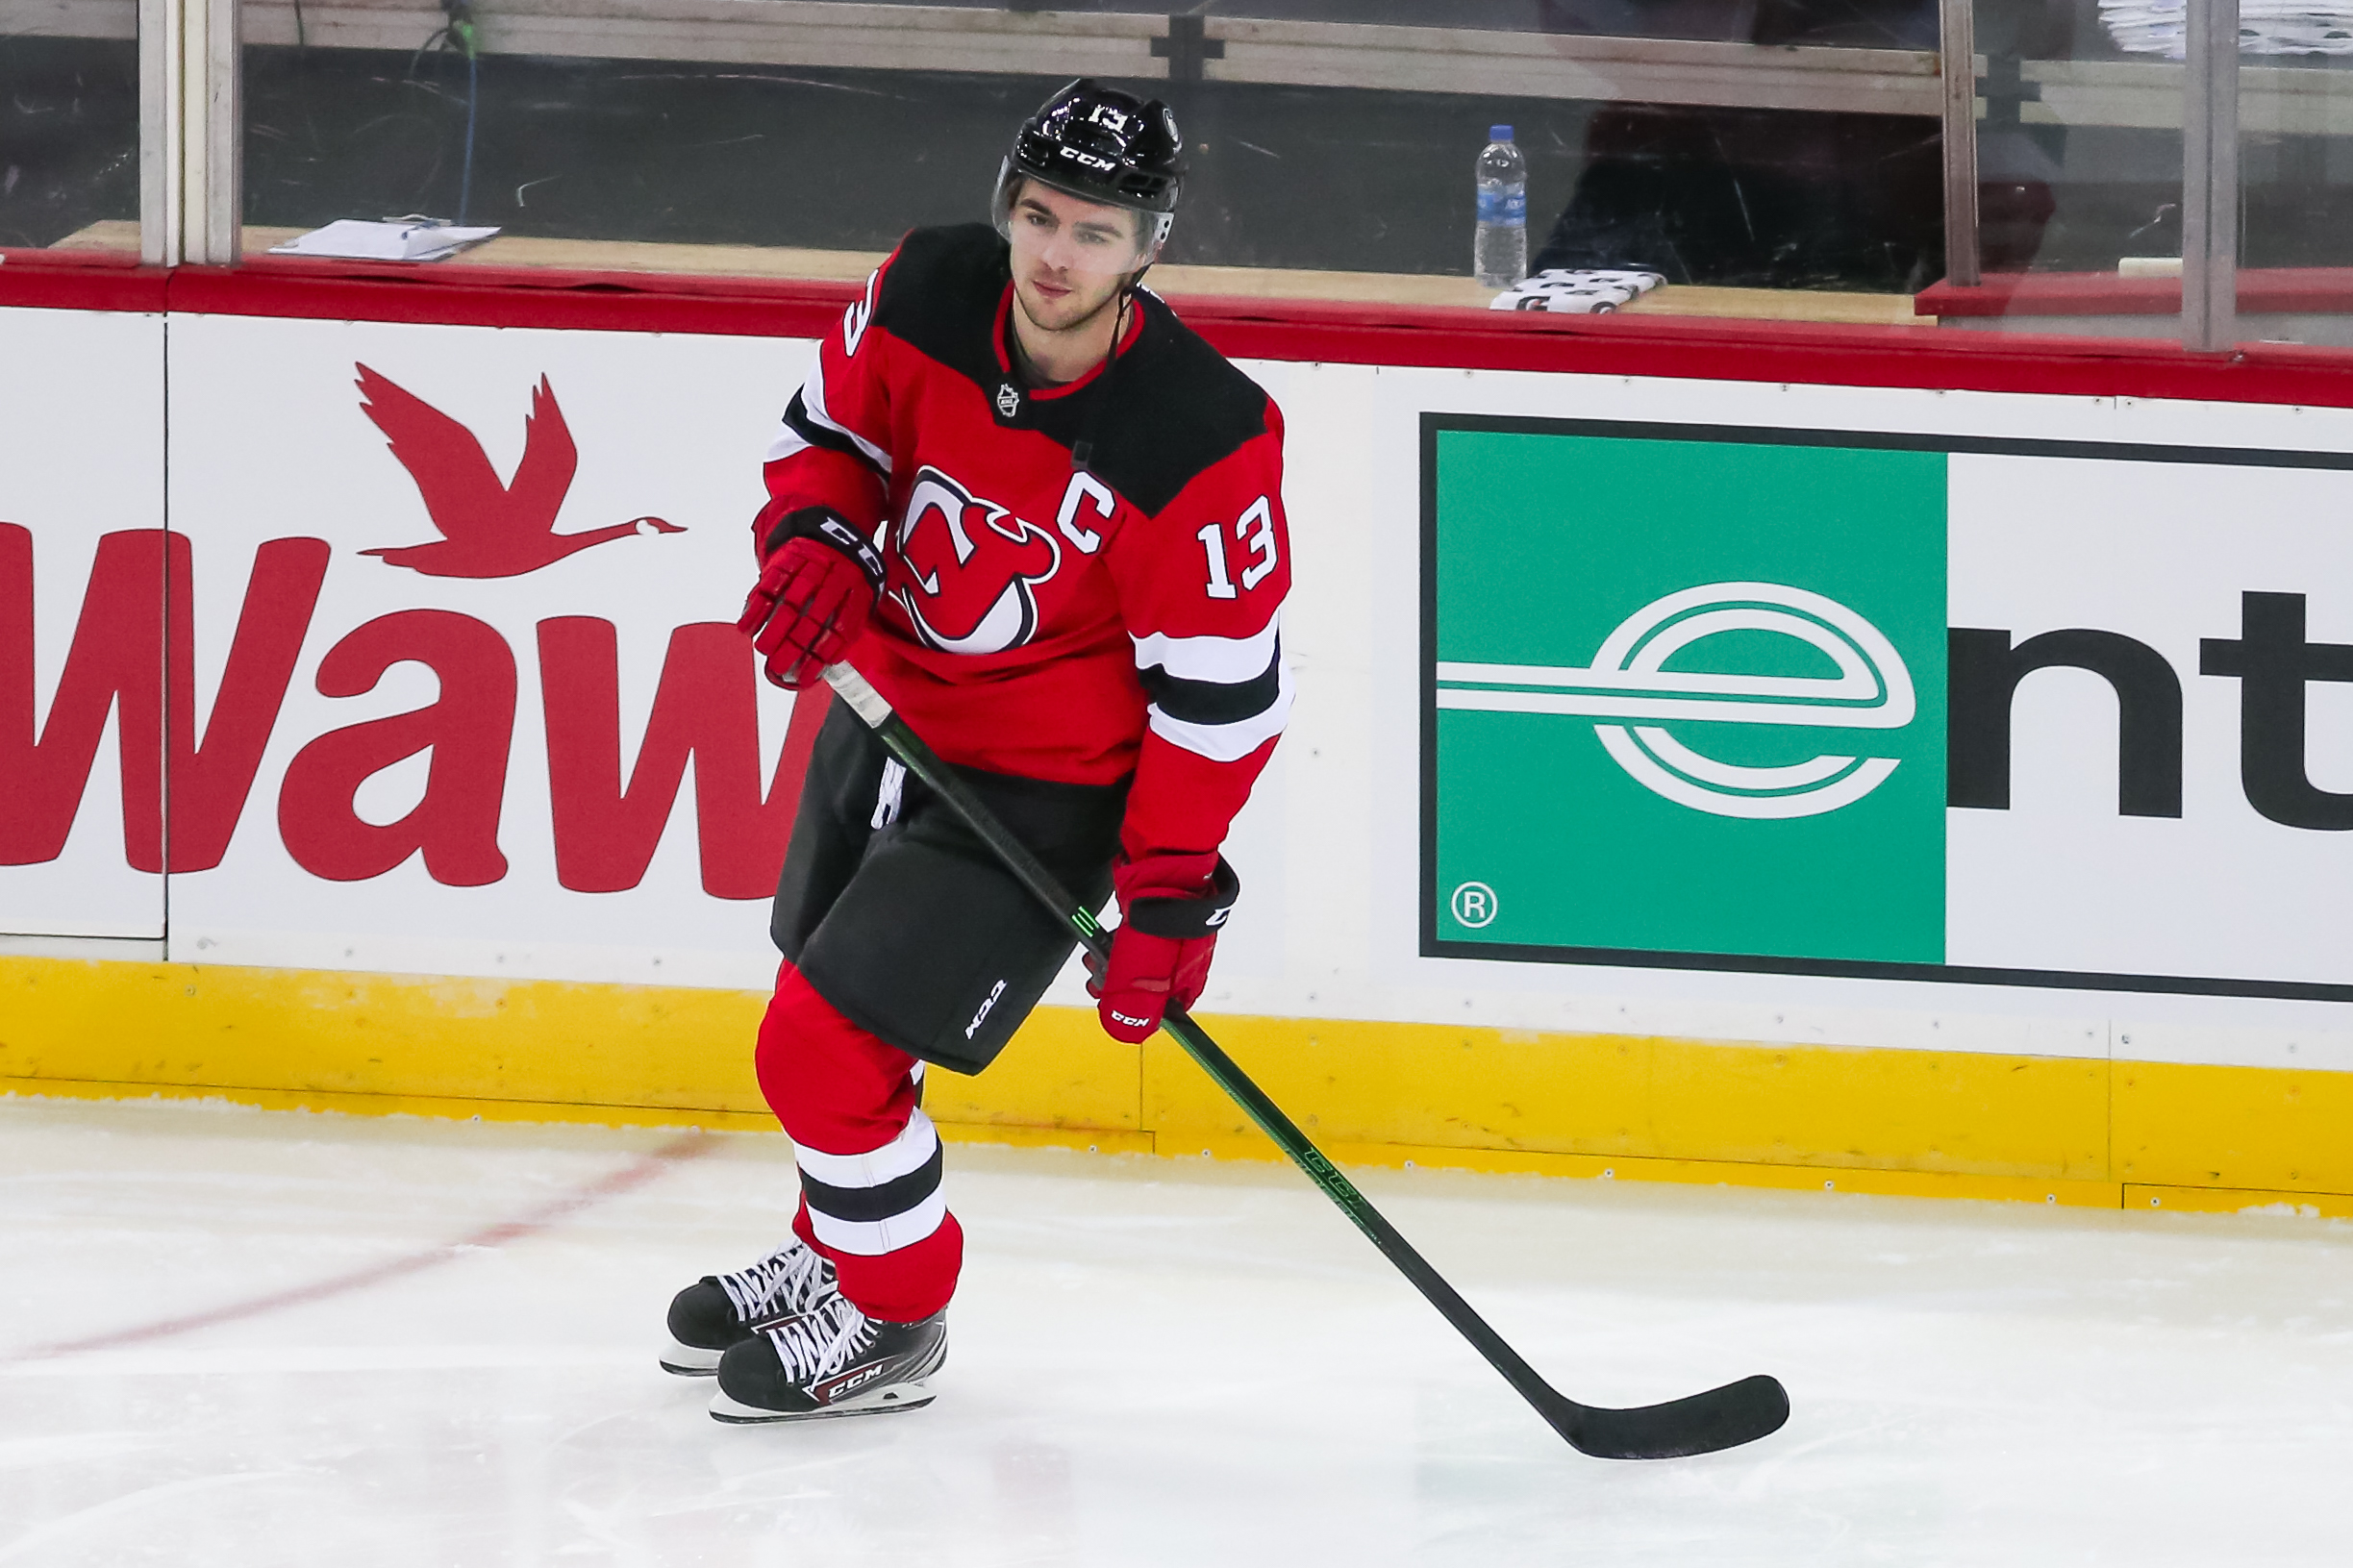 New Jersey Devils: Nico Hischier was the only logical choice for Captain